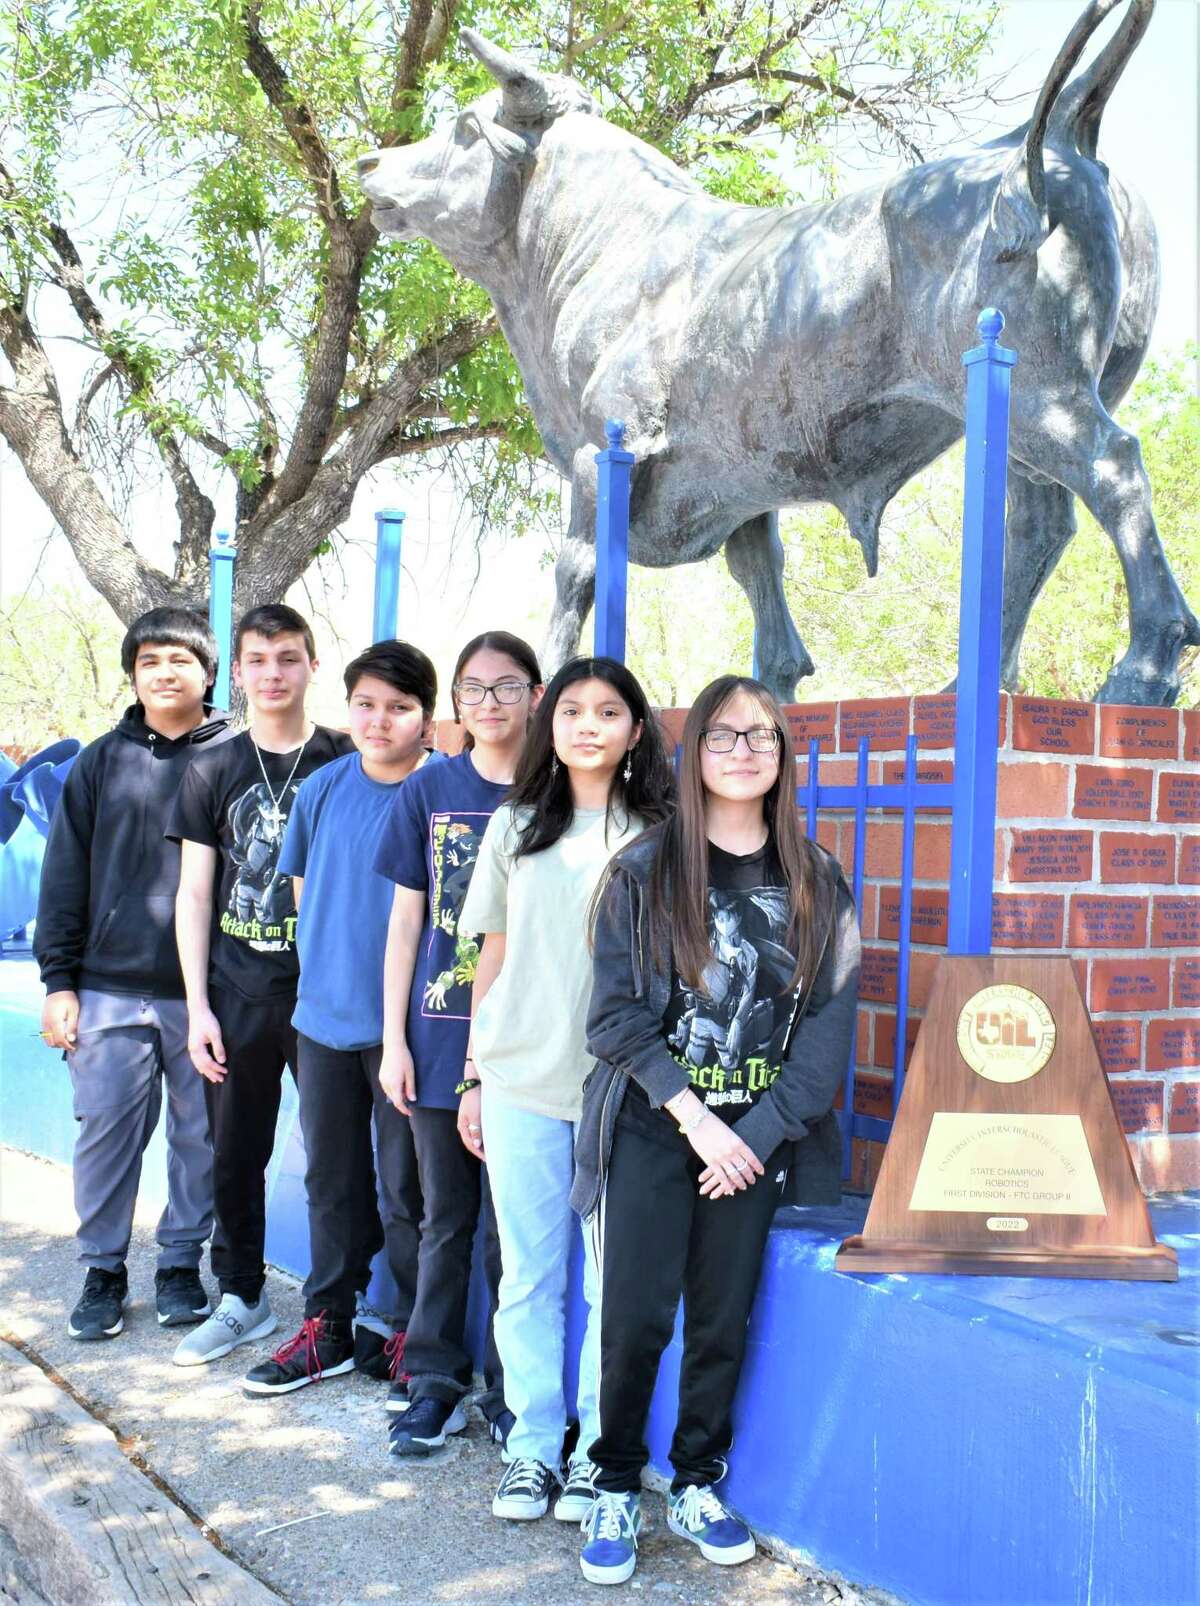 The Cigarroa High School Soap Dispenser Robotics team, pictured, and the J. W. Nixon High School Dark Horse Robotics team allied to win the 2022 UIL Robotics State Championship FTC 5A-6A Division at the Texas State UIL Robotics Competition.